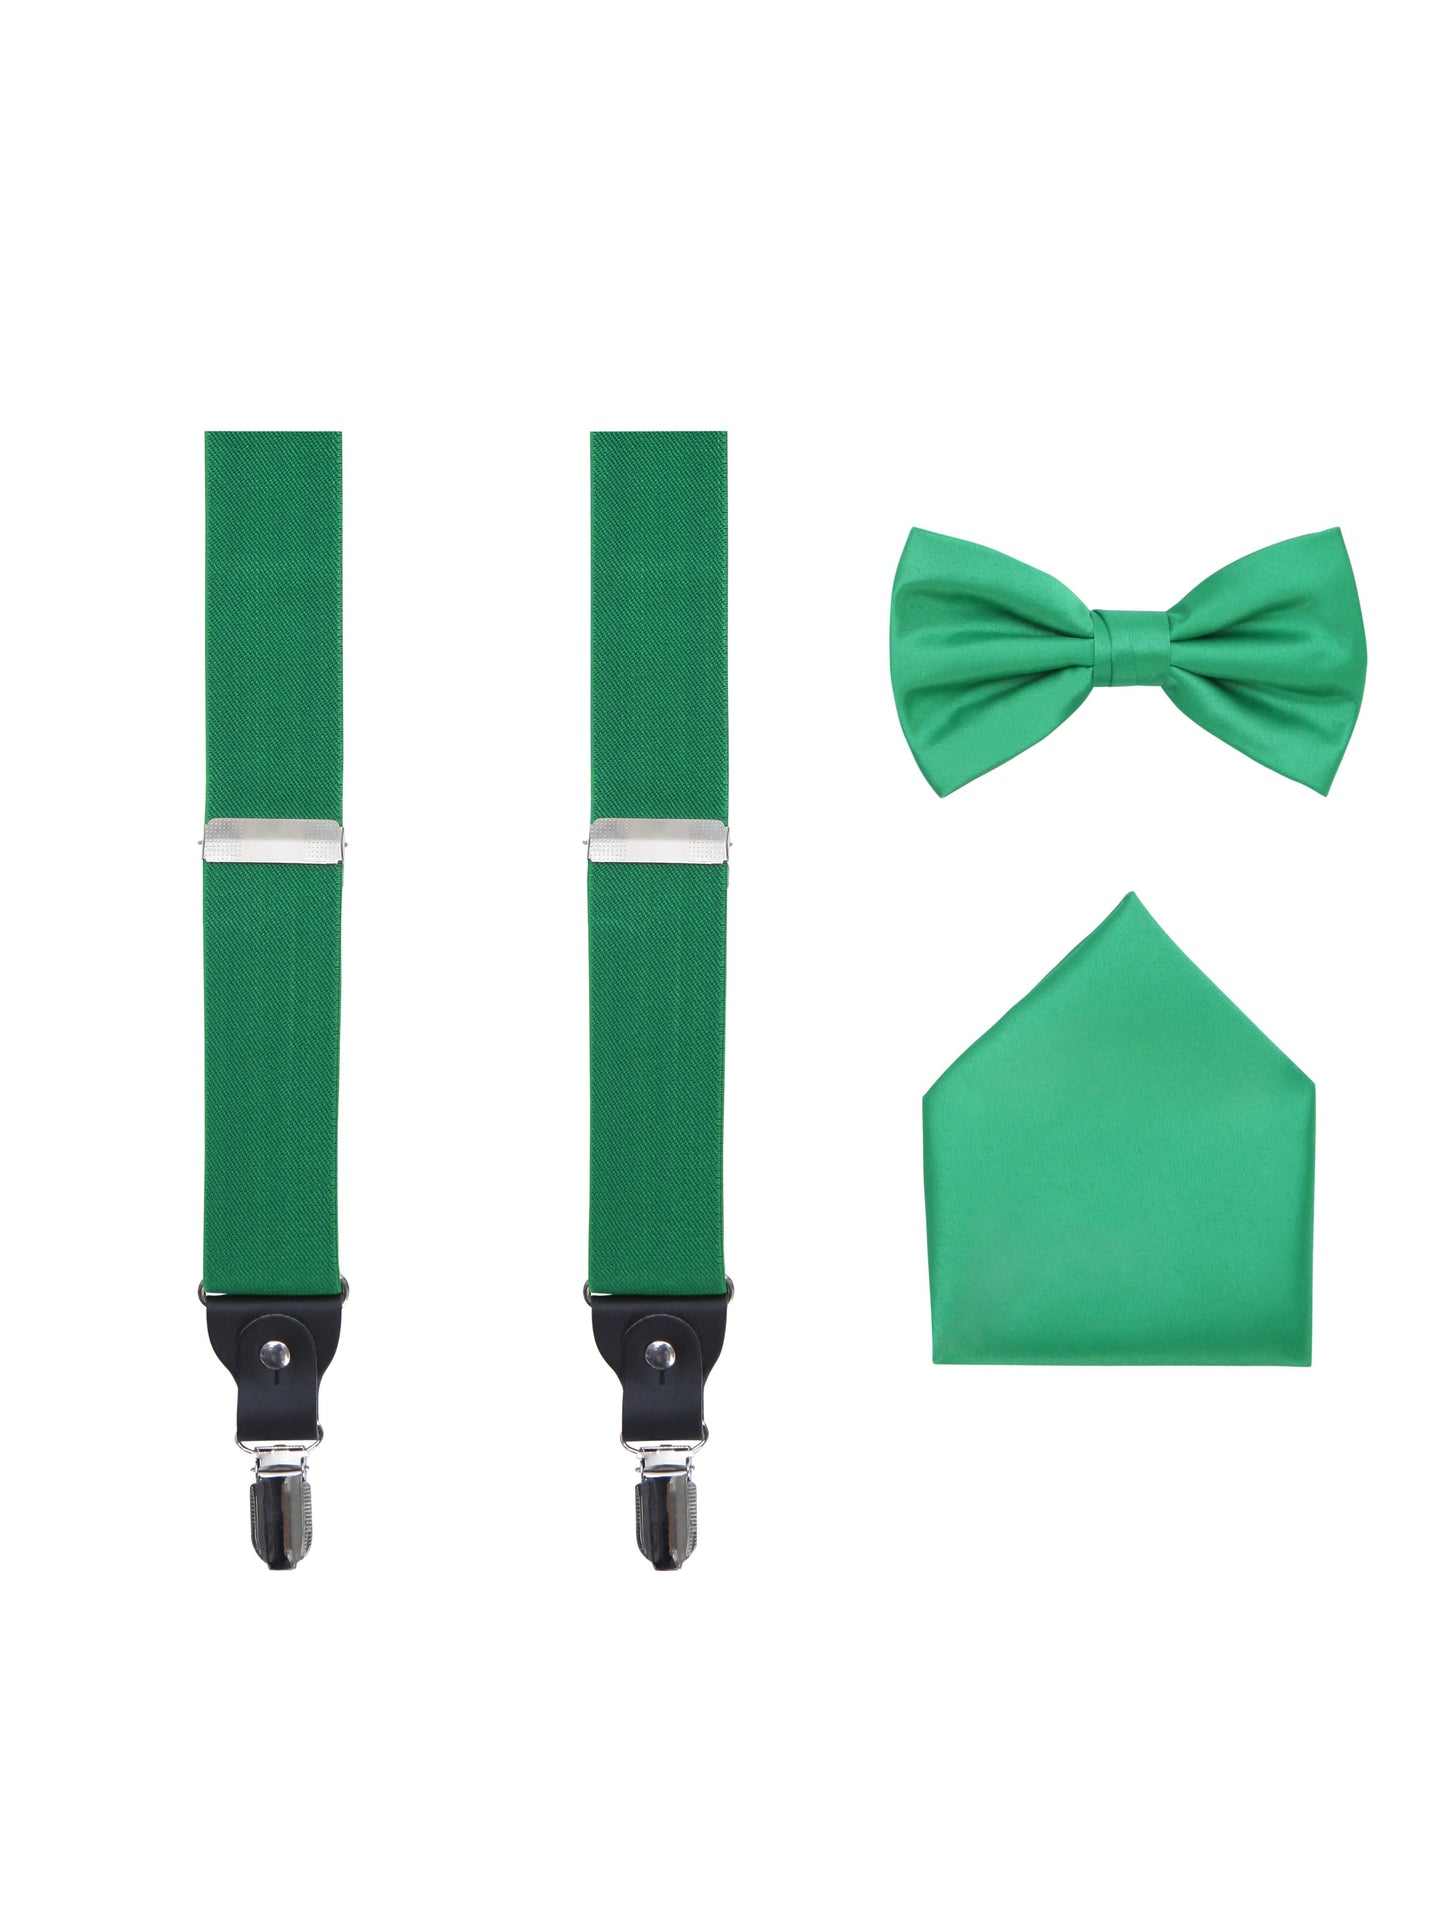 S.H. Churchill & Co. Men's 3 Piece Kelly Green Suspender Set, - Includes Suspenders Matching Bow Tie, Pocket Hanky and Gift Box